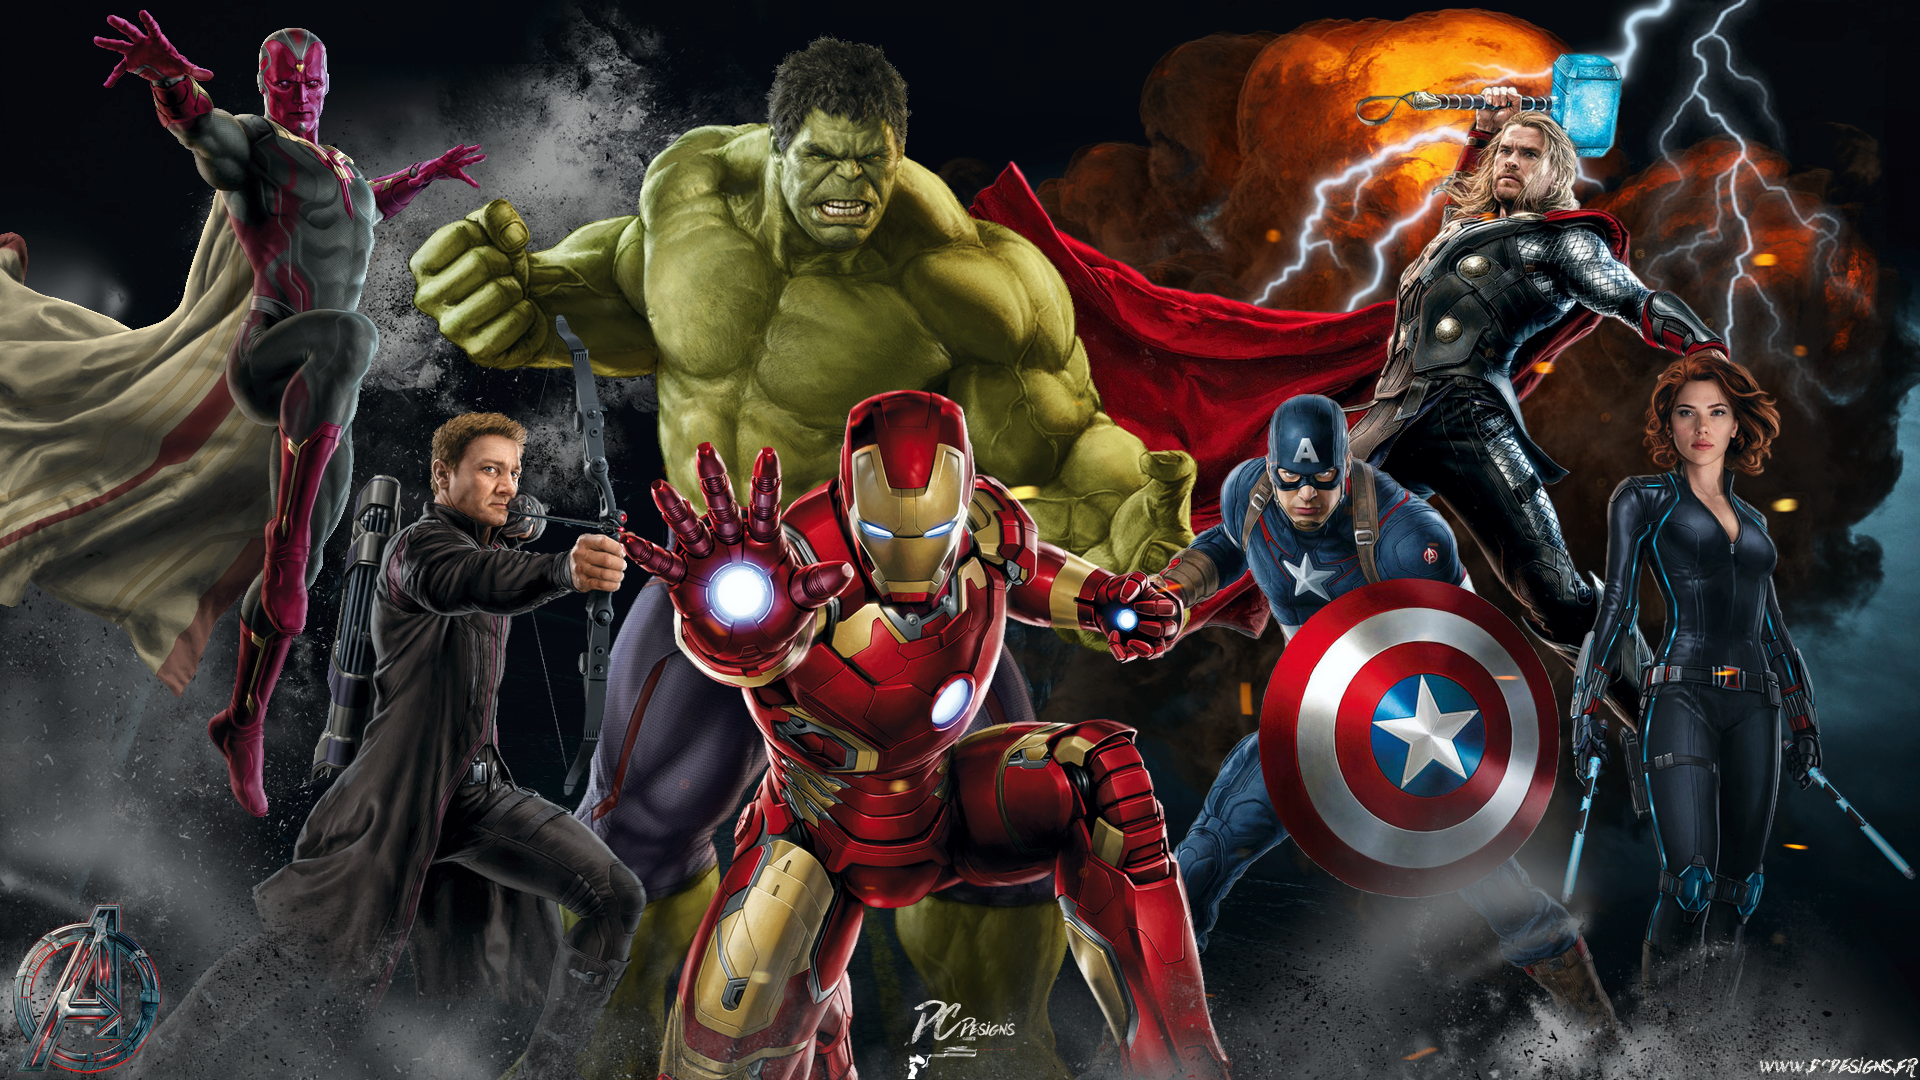 New movies Avengers Age Of Ultron some best HD Wallpapers 2015   All